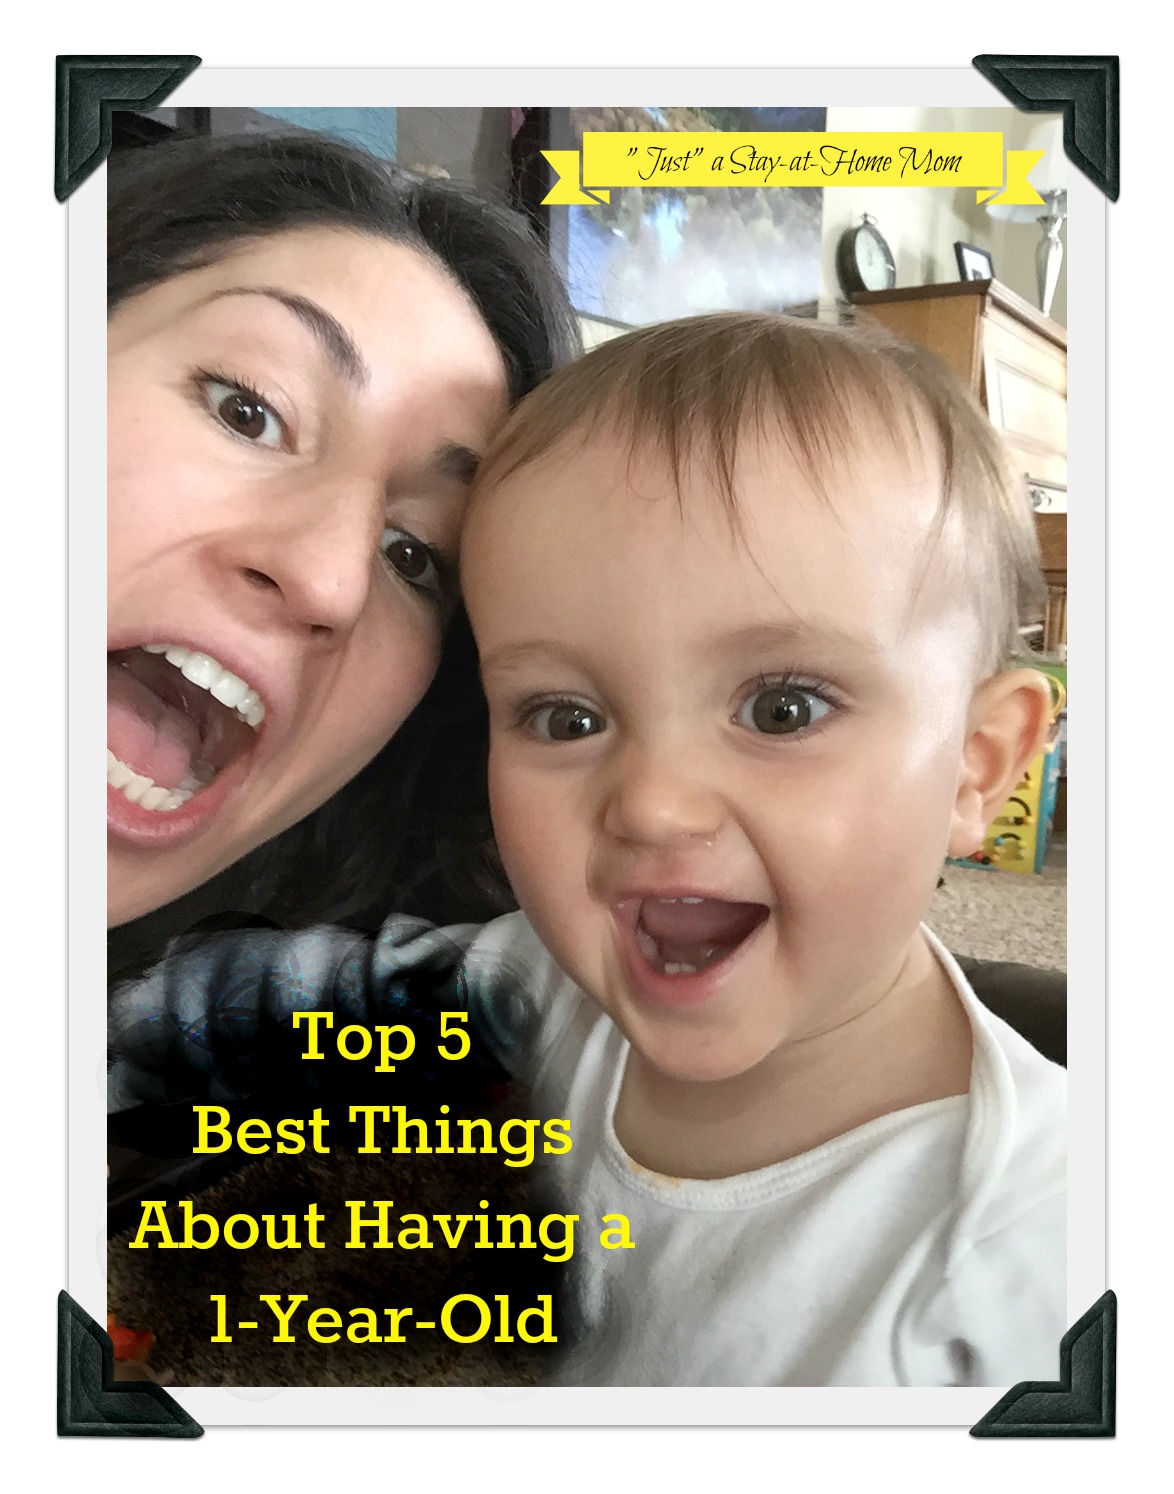 Top 5 best things about having a 1-year-old